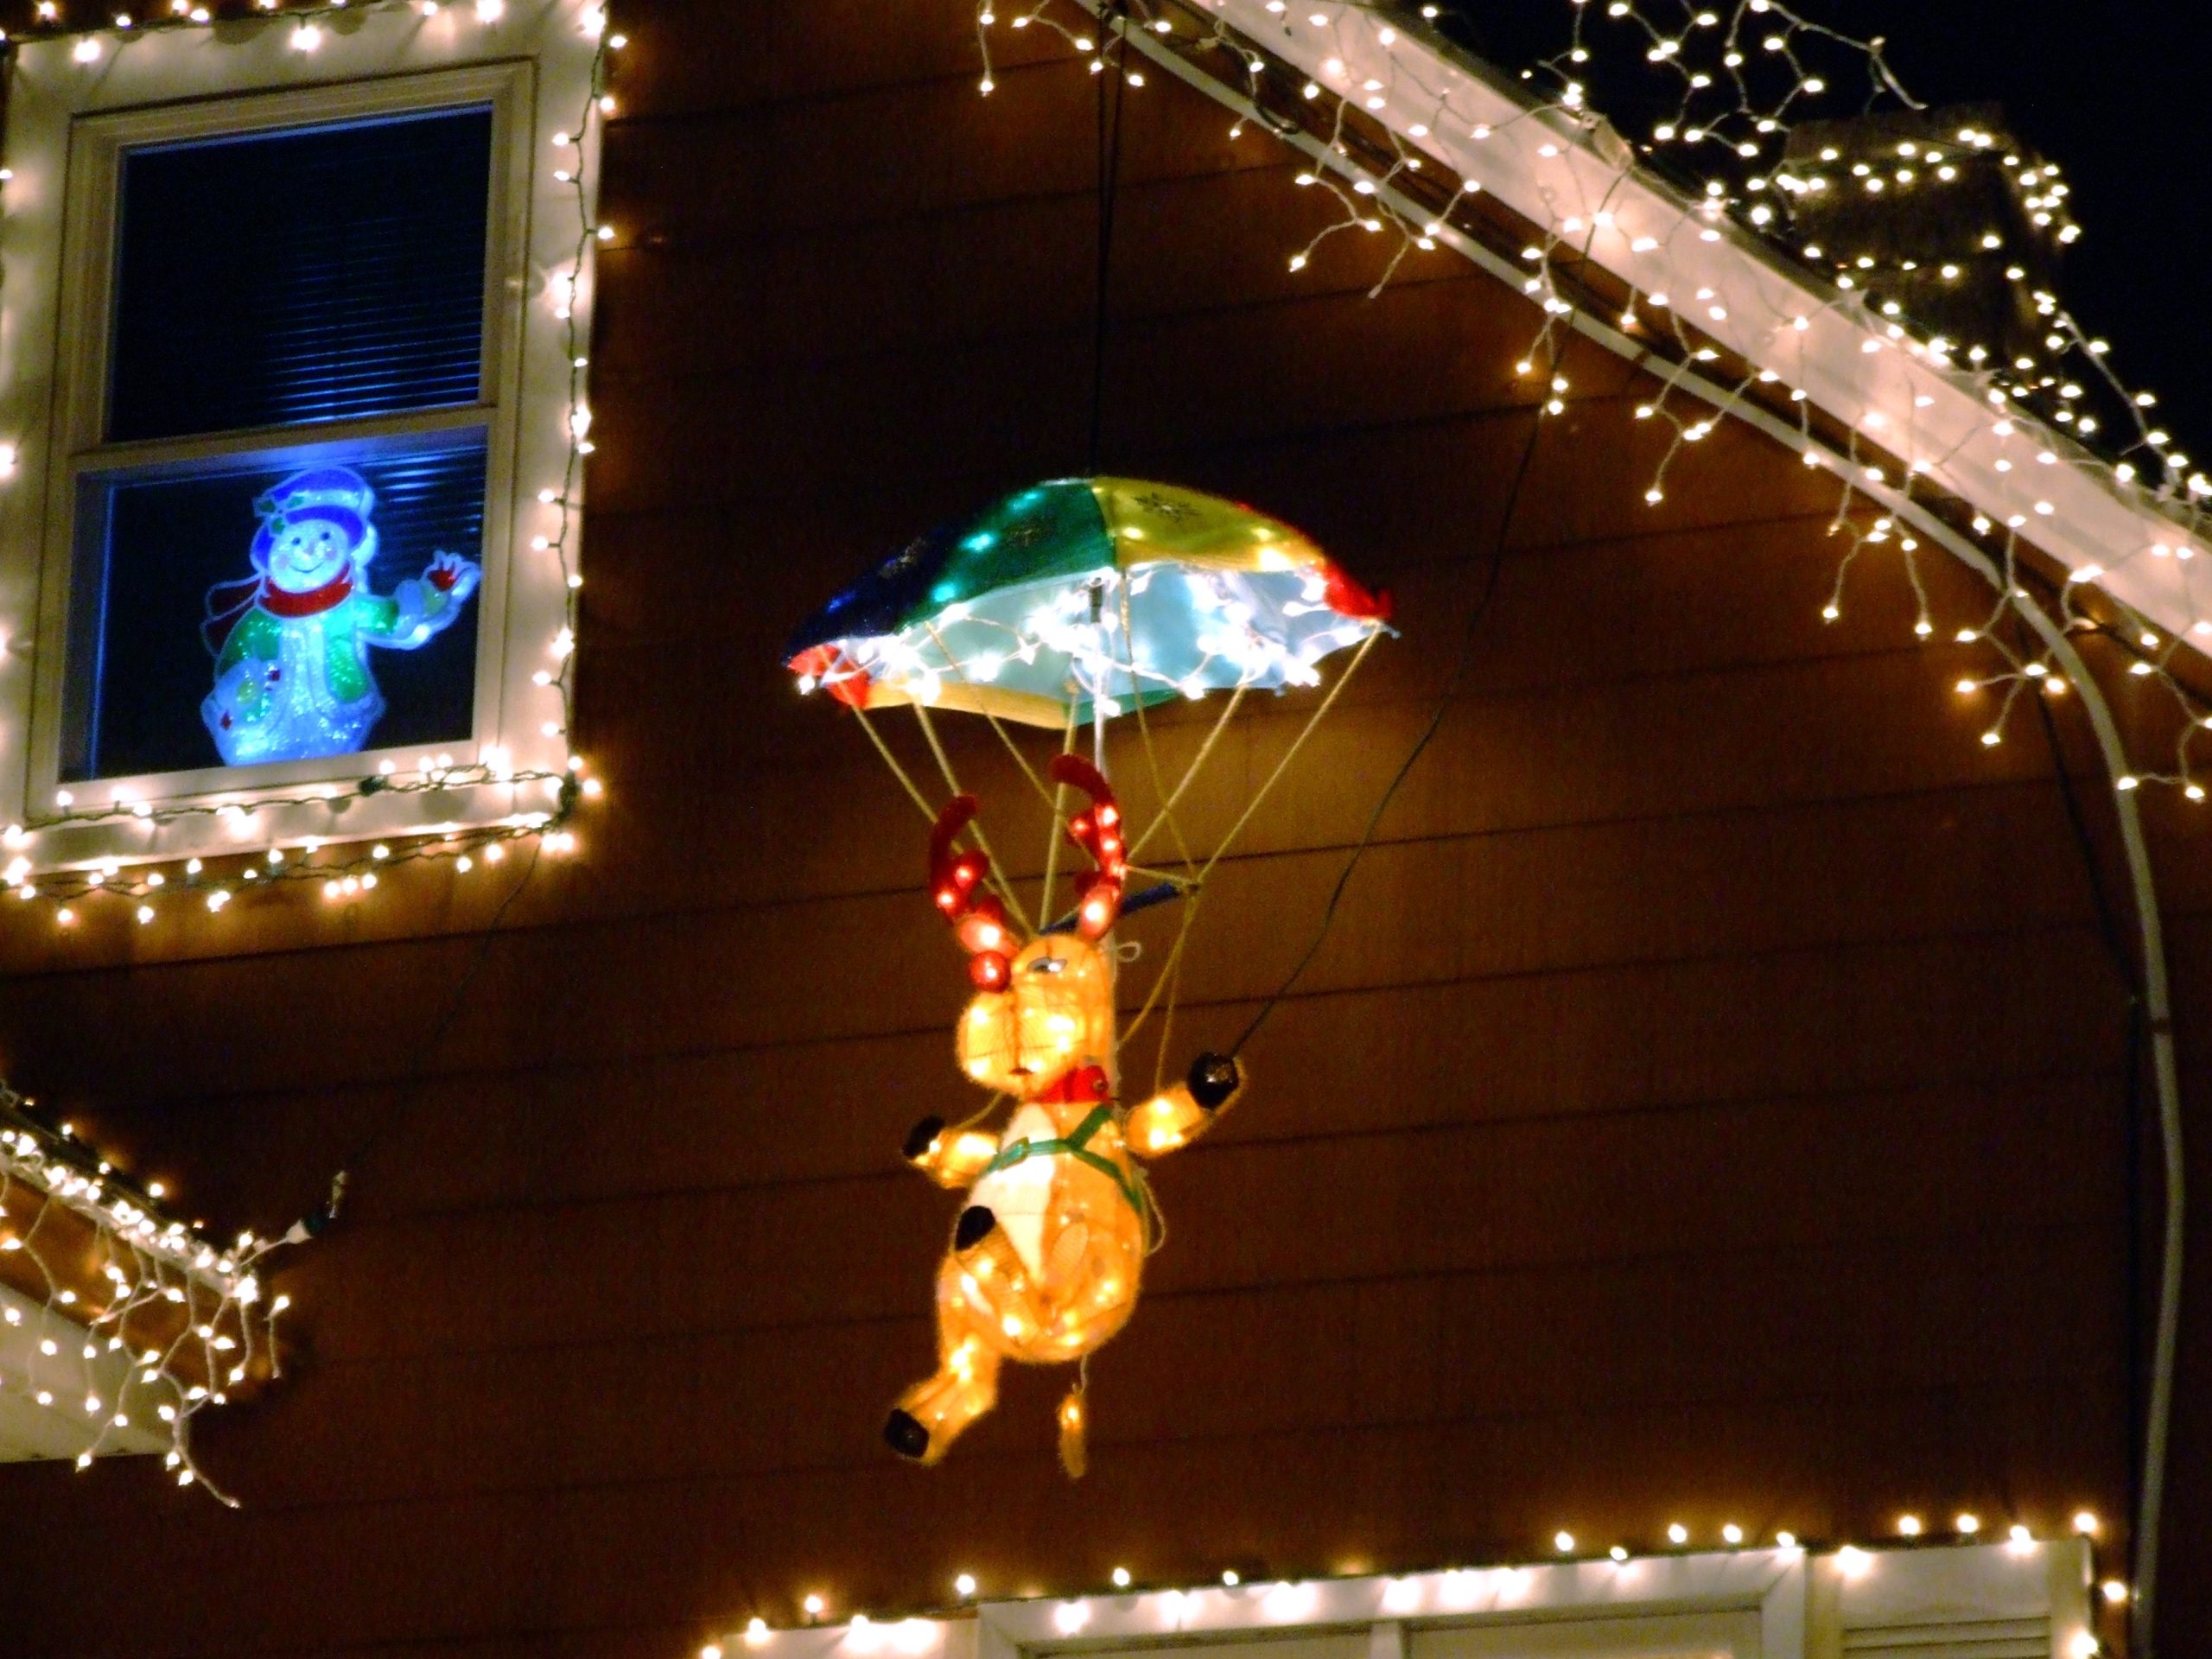 Parachuting Reindeer Decoration (user submitted)